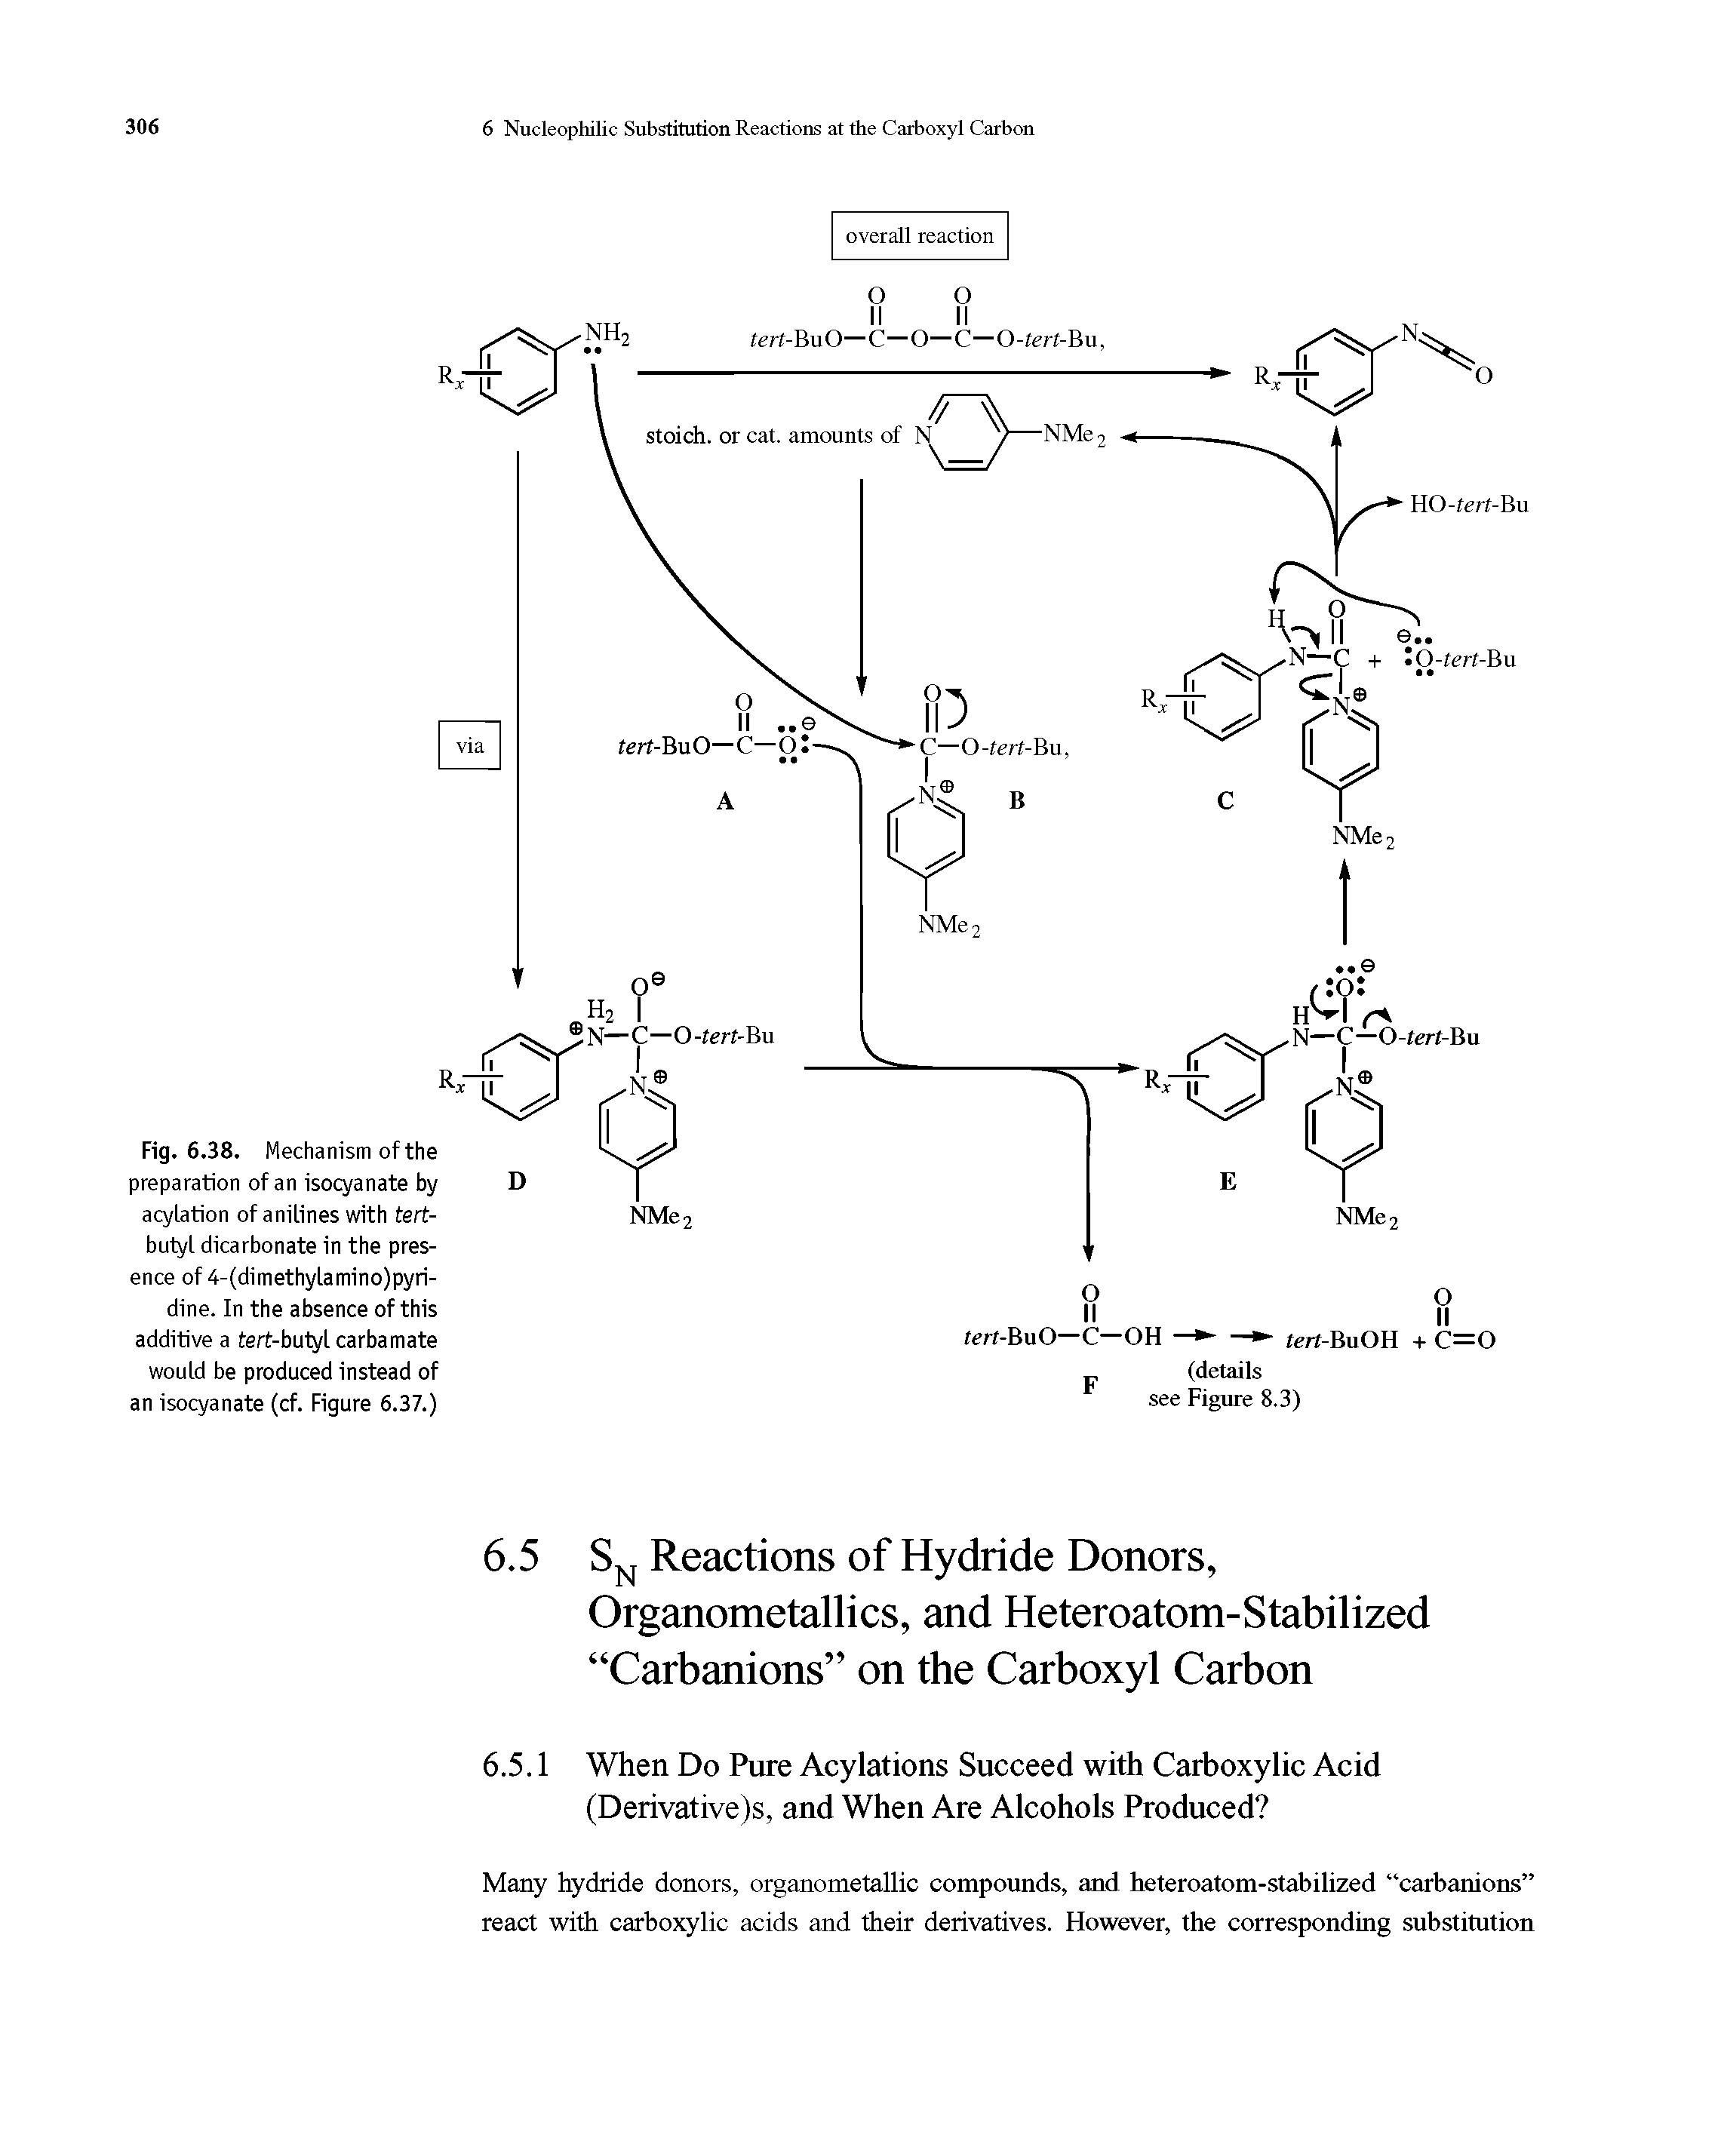 Fig. 6.38. Mechanism of the preparation of an isocyanate by acylation of anilines with tert-butyl dicarbonate in the presence of 4-(dimethylamino)pyri-dine. In the absence of this additive a tert-butyl carbamate would be produced instead of an isocyanate (cf. Figure 6.37.)...